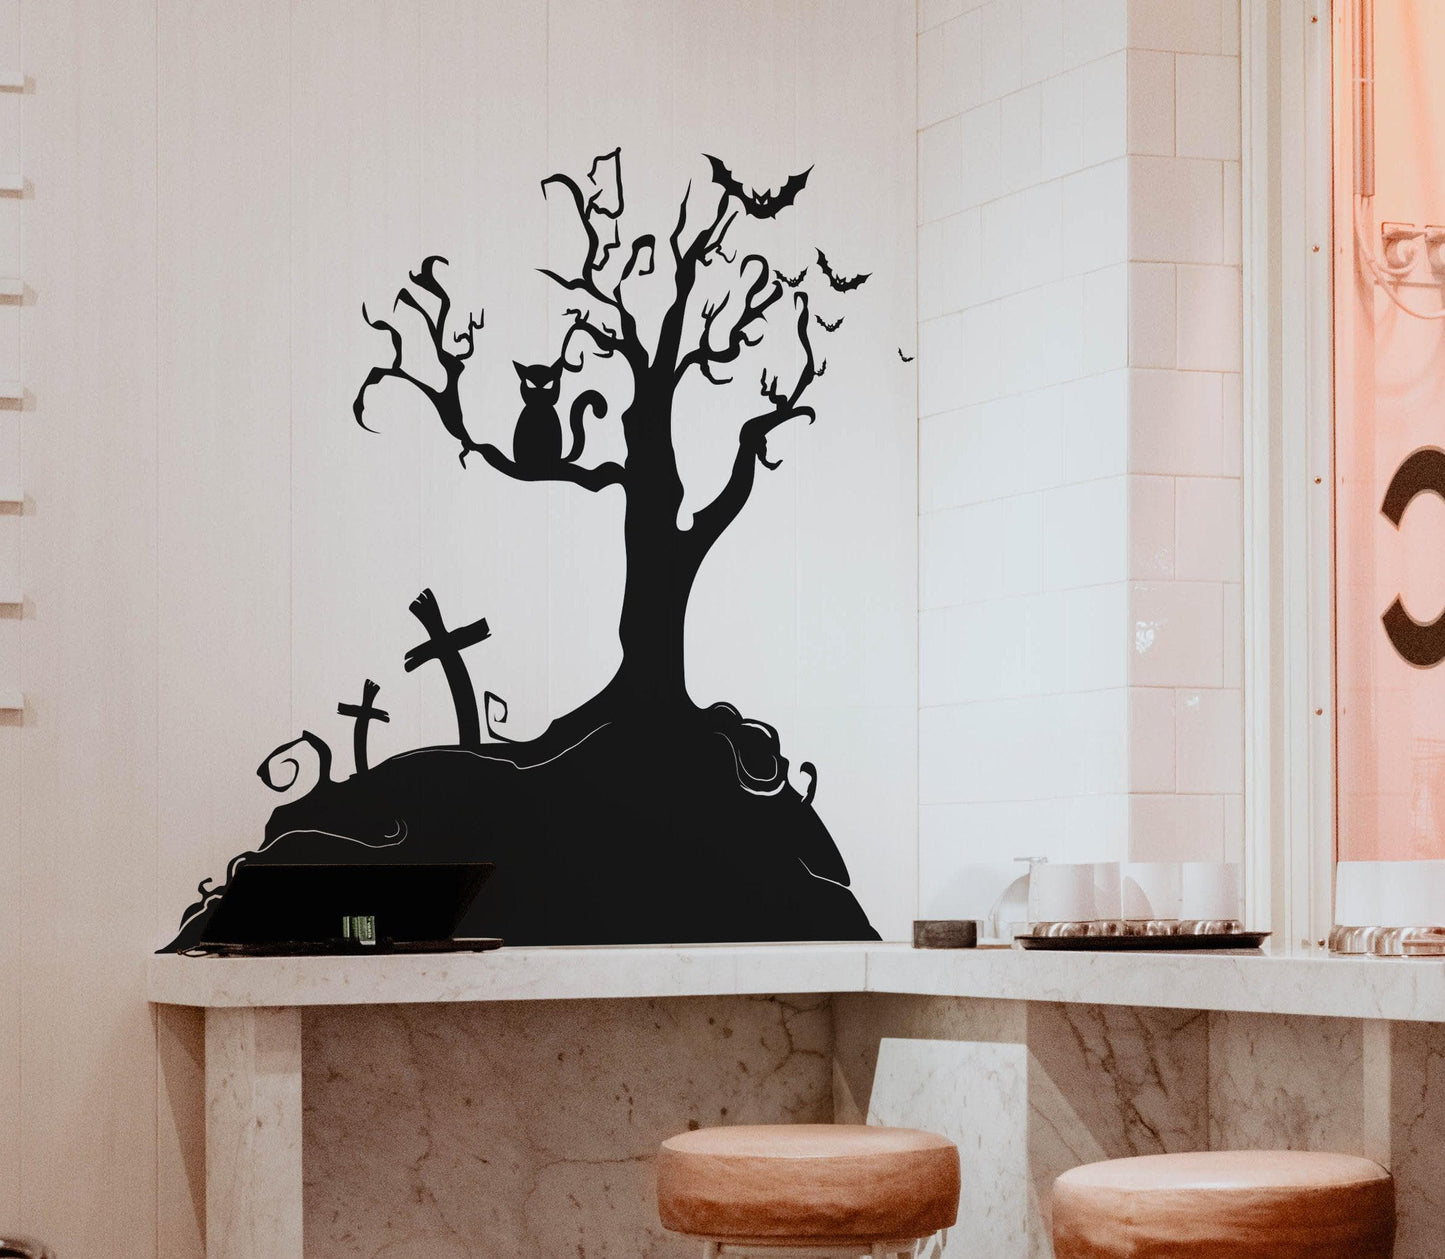 Spooky Graveyard Tree Wall Decal - Halloween Haunt for Your Home #1014